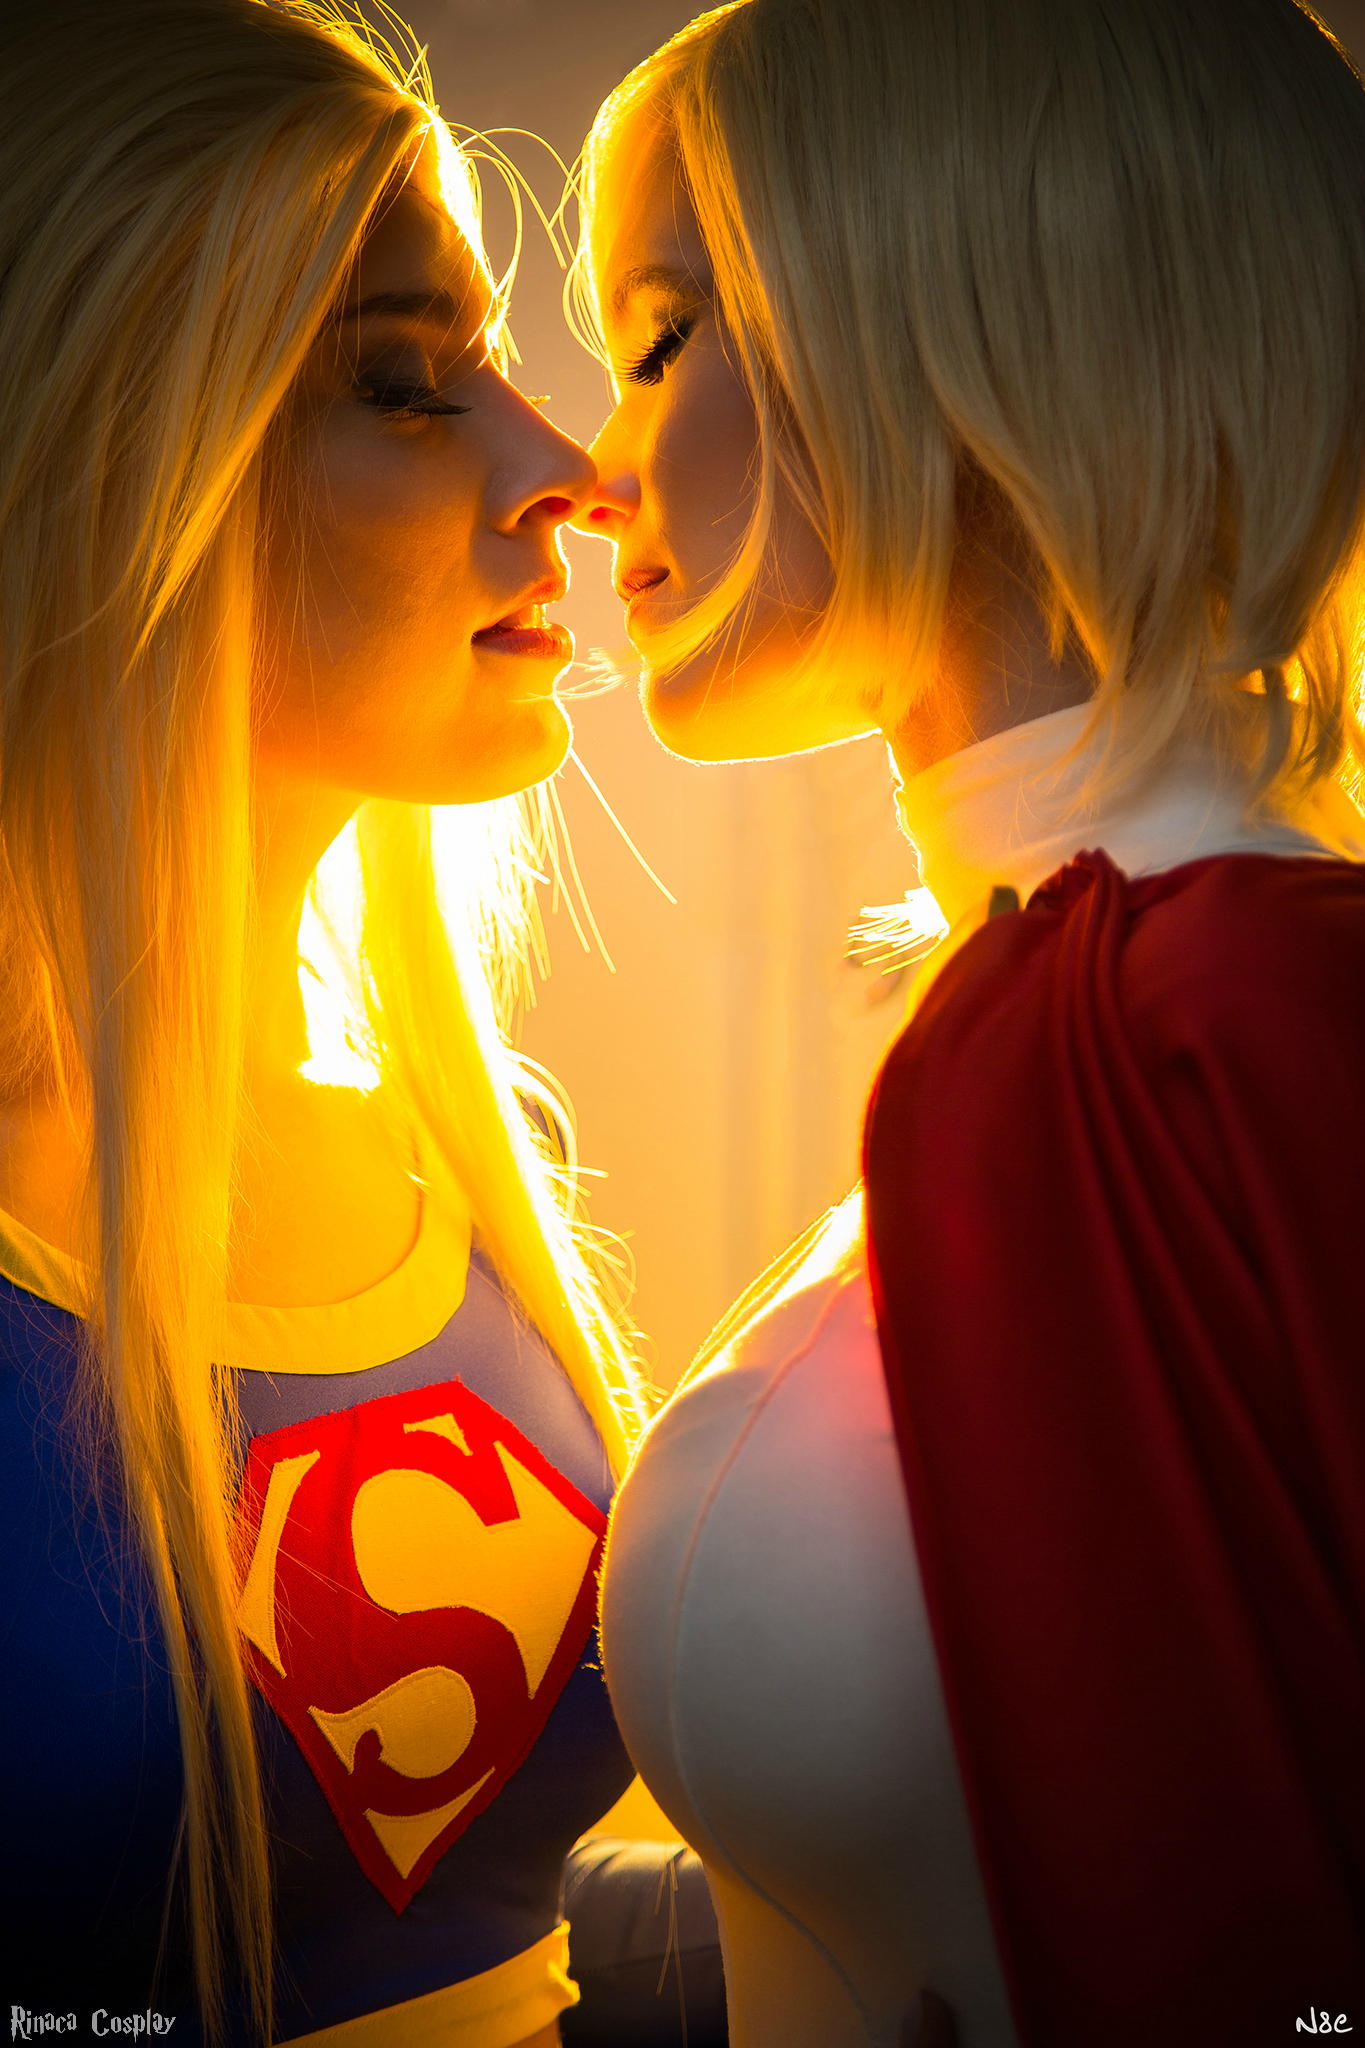 If you know your comic lore you probably know Supergirl and Powergirl are cousins. I'll let that sink in for a while.